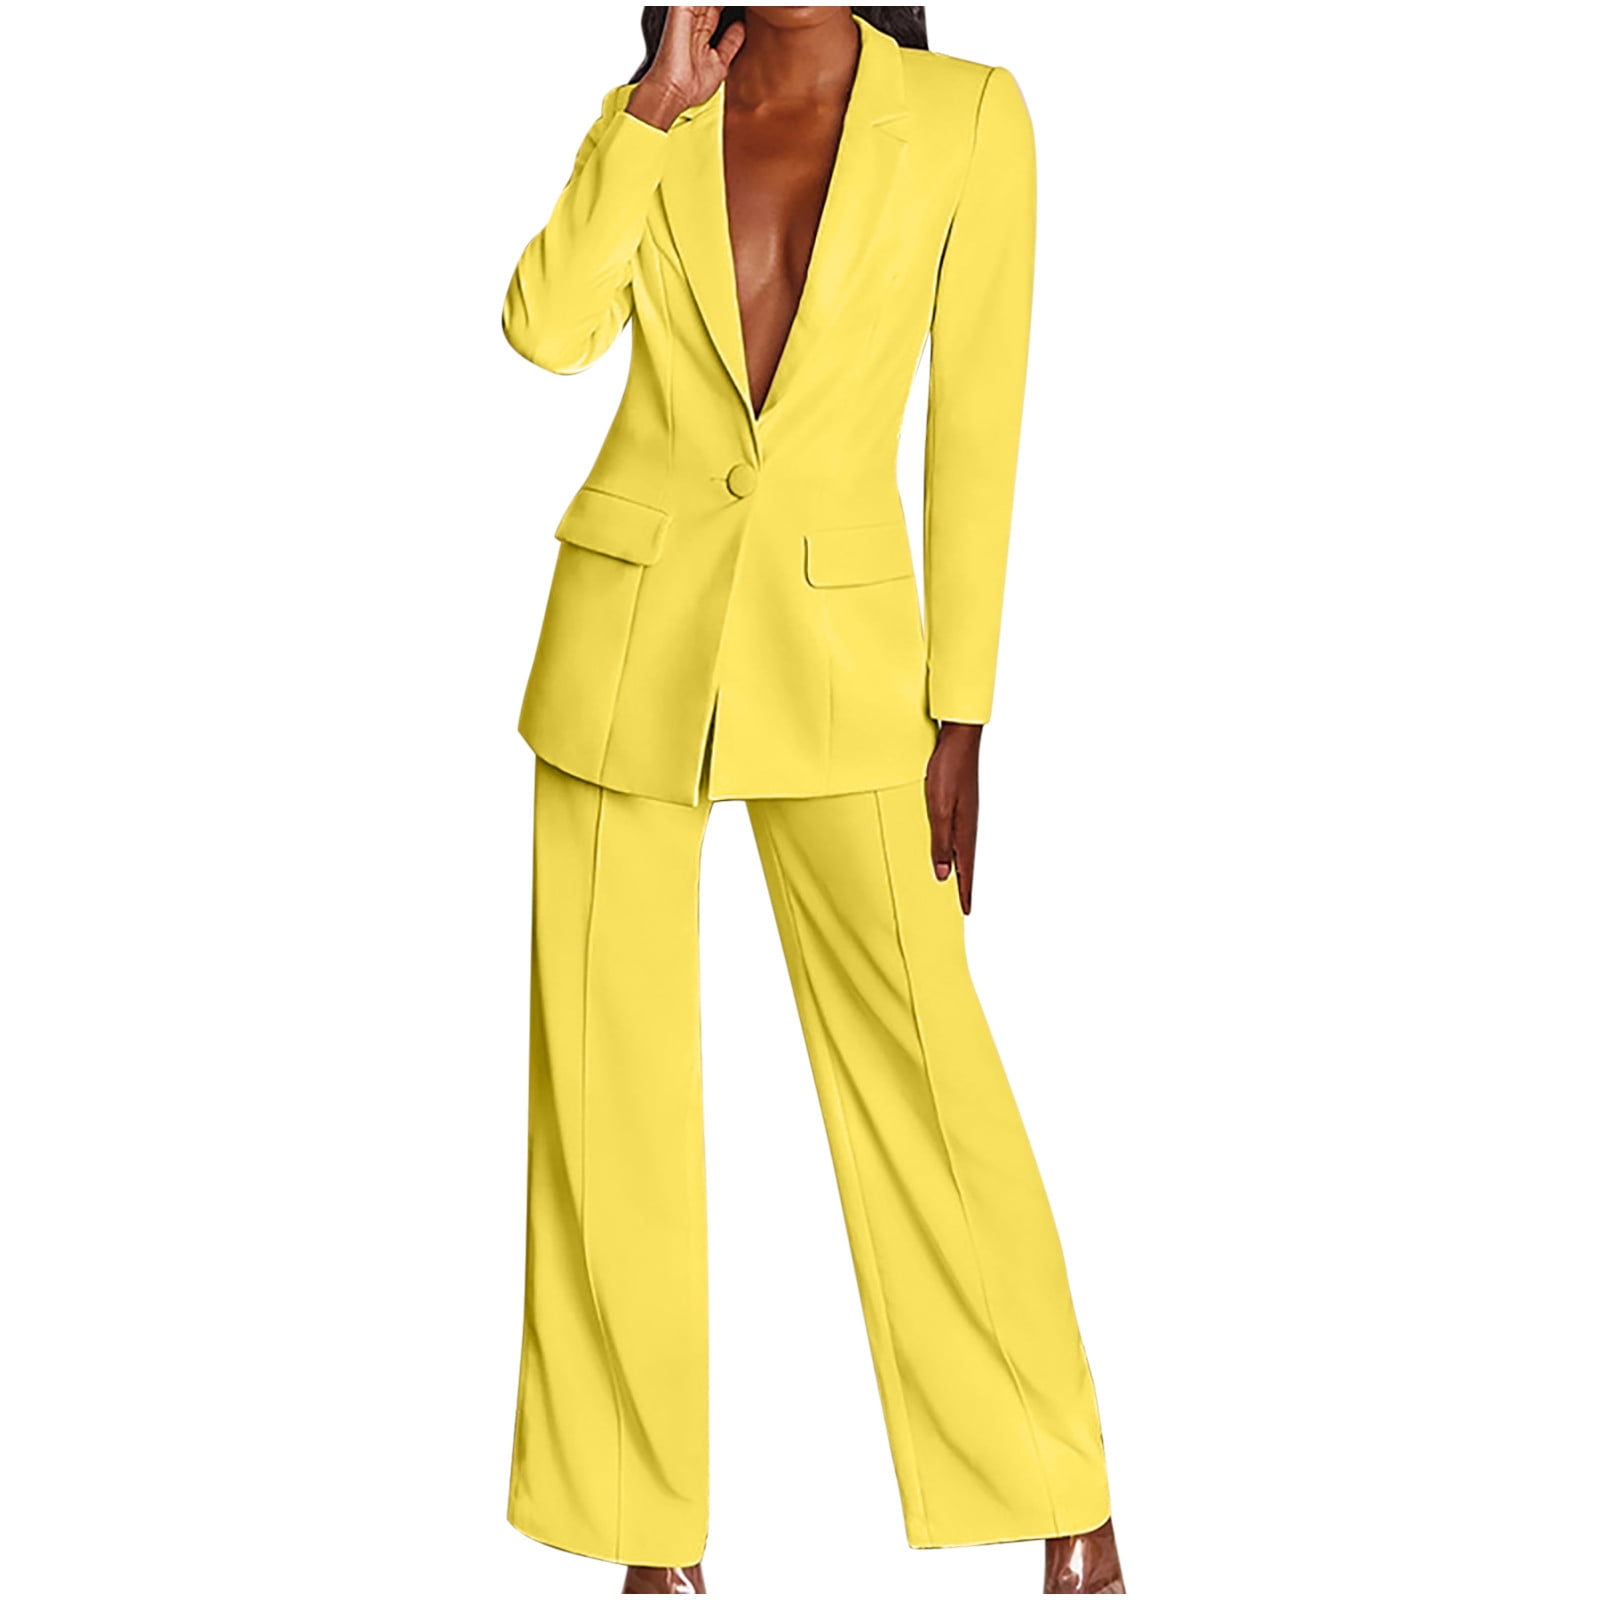 JSGEK Discount Sexy 2 Piece Outfits for Women Long Sleeve Solid Blazer with  Pants Casual Elegant Business Suit Sets Yellow XL 